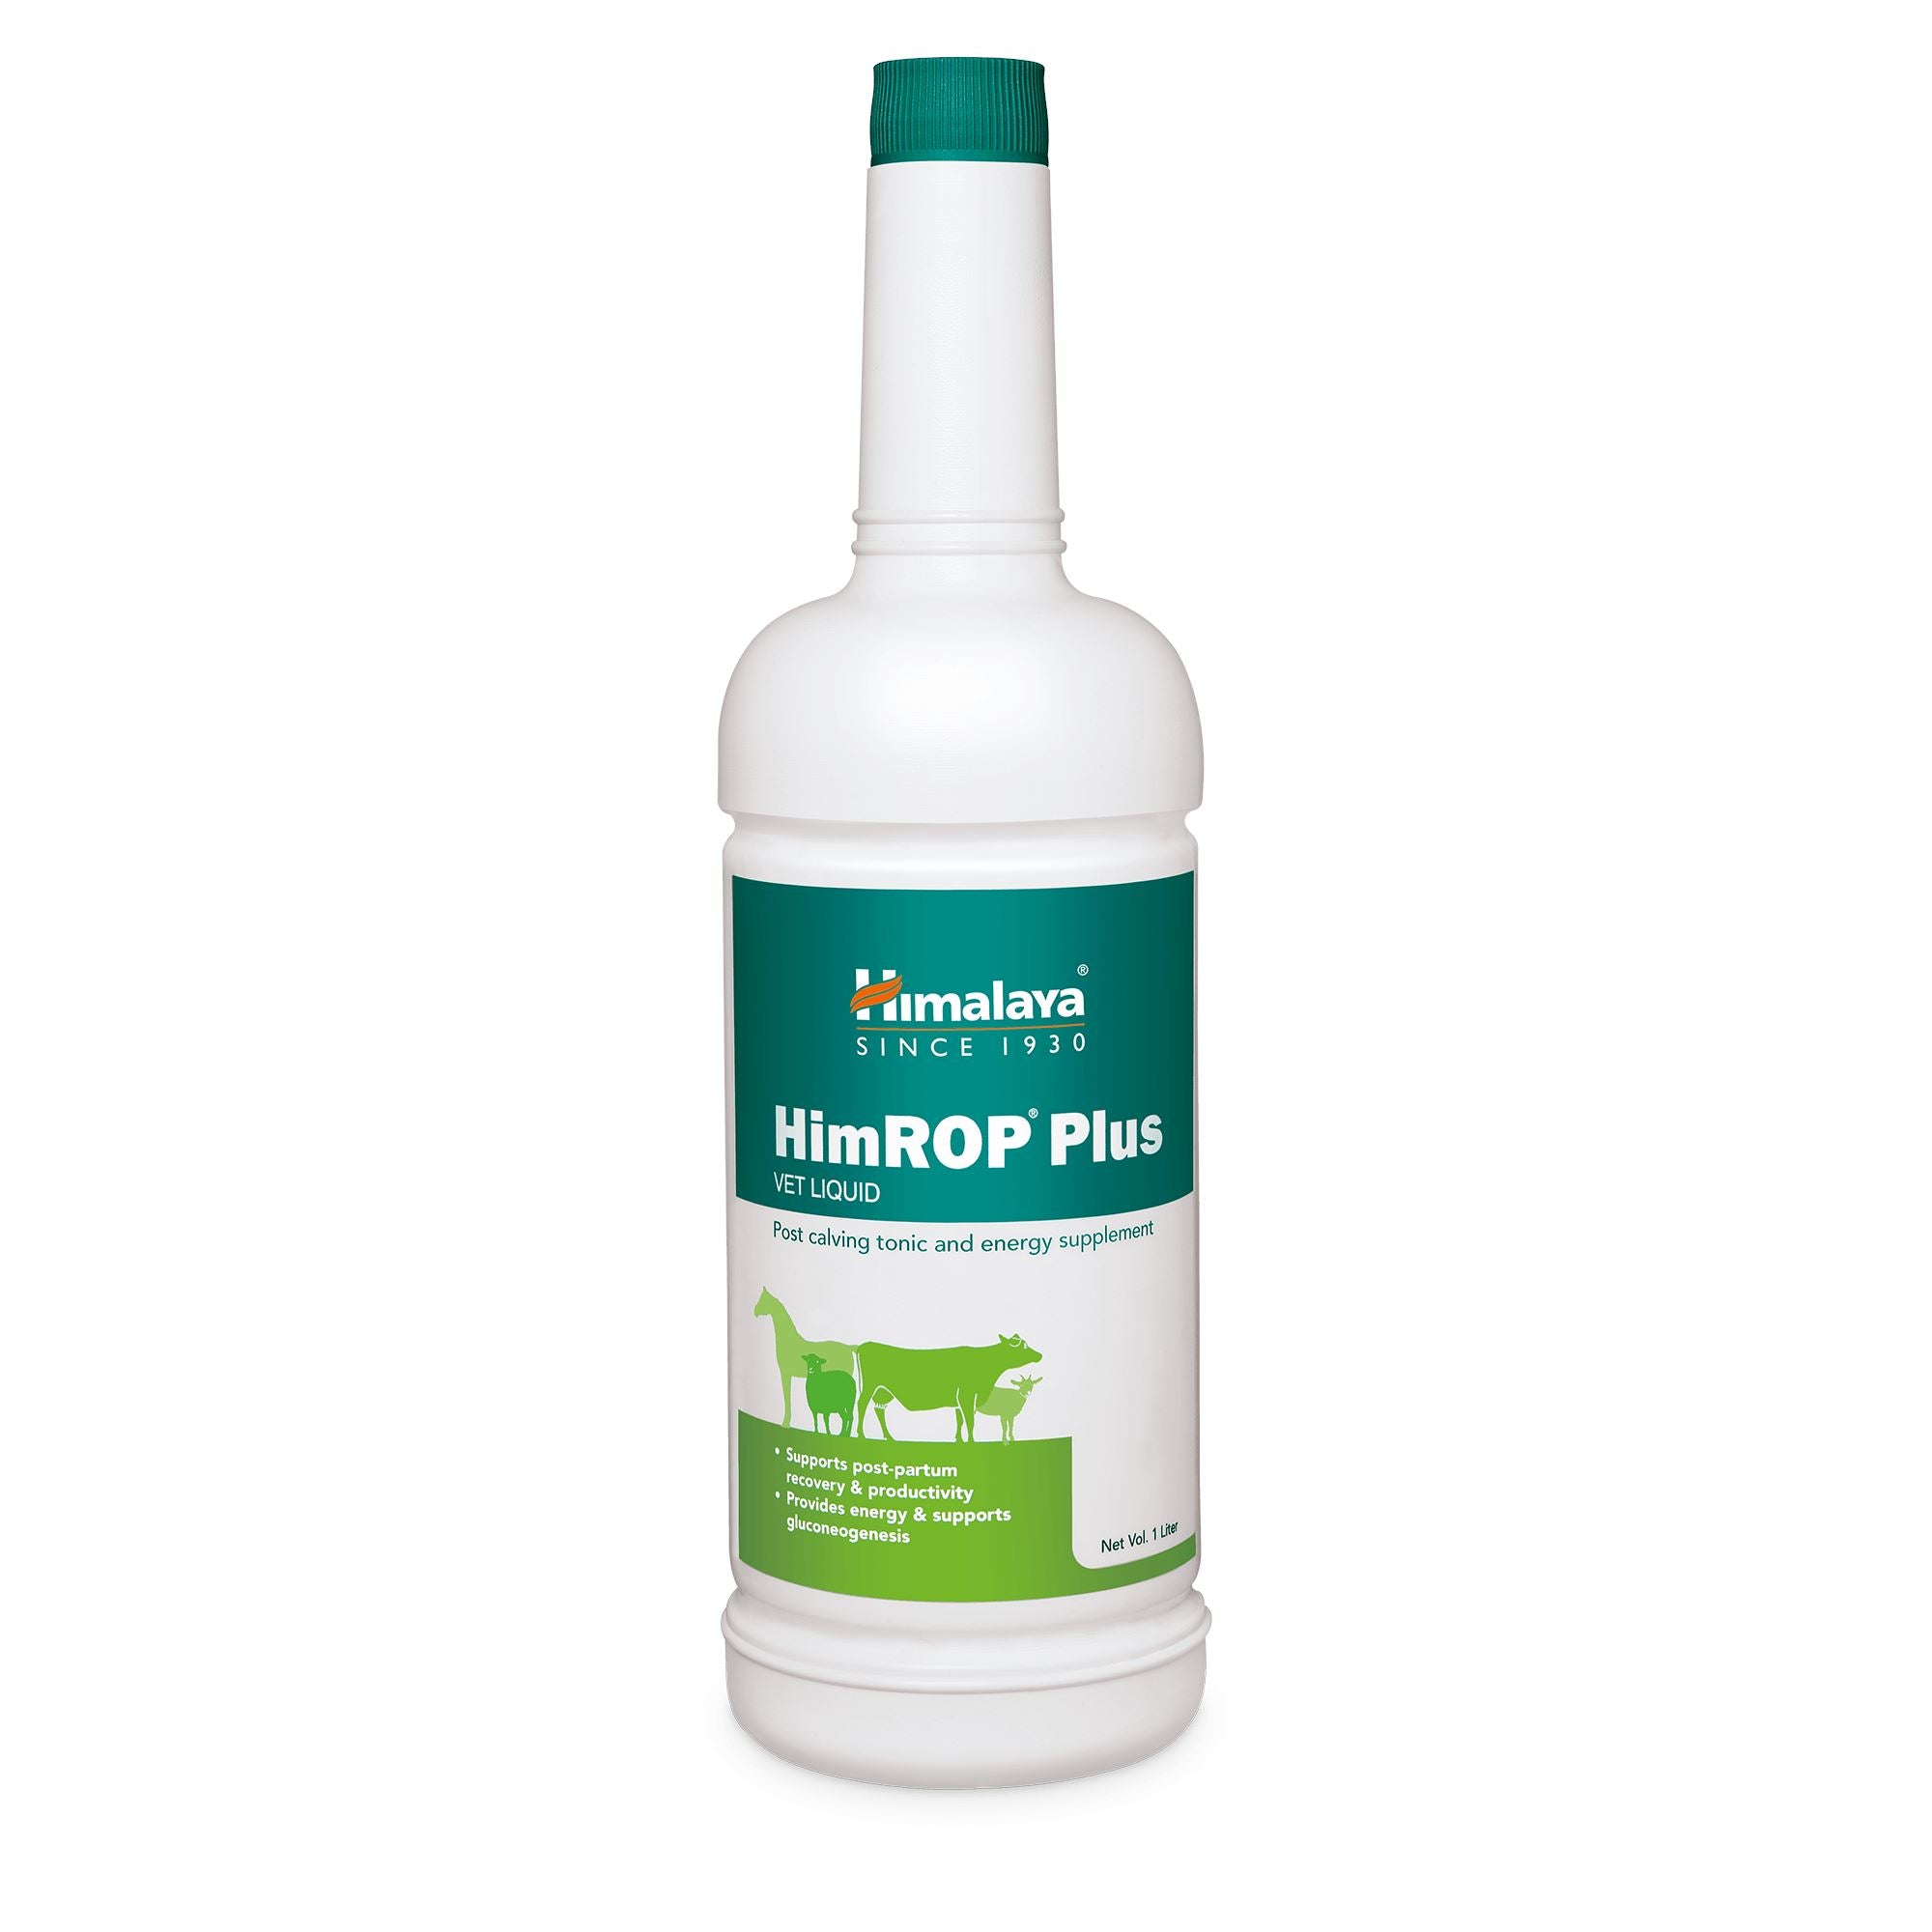 Himalaya HimROP Plus 1 litre- Post-Calving Tonic and Energy Supplement